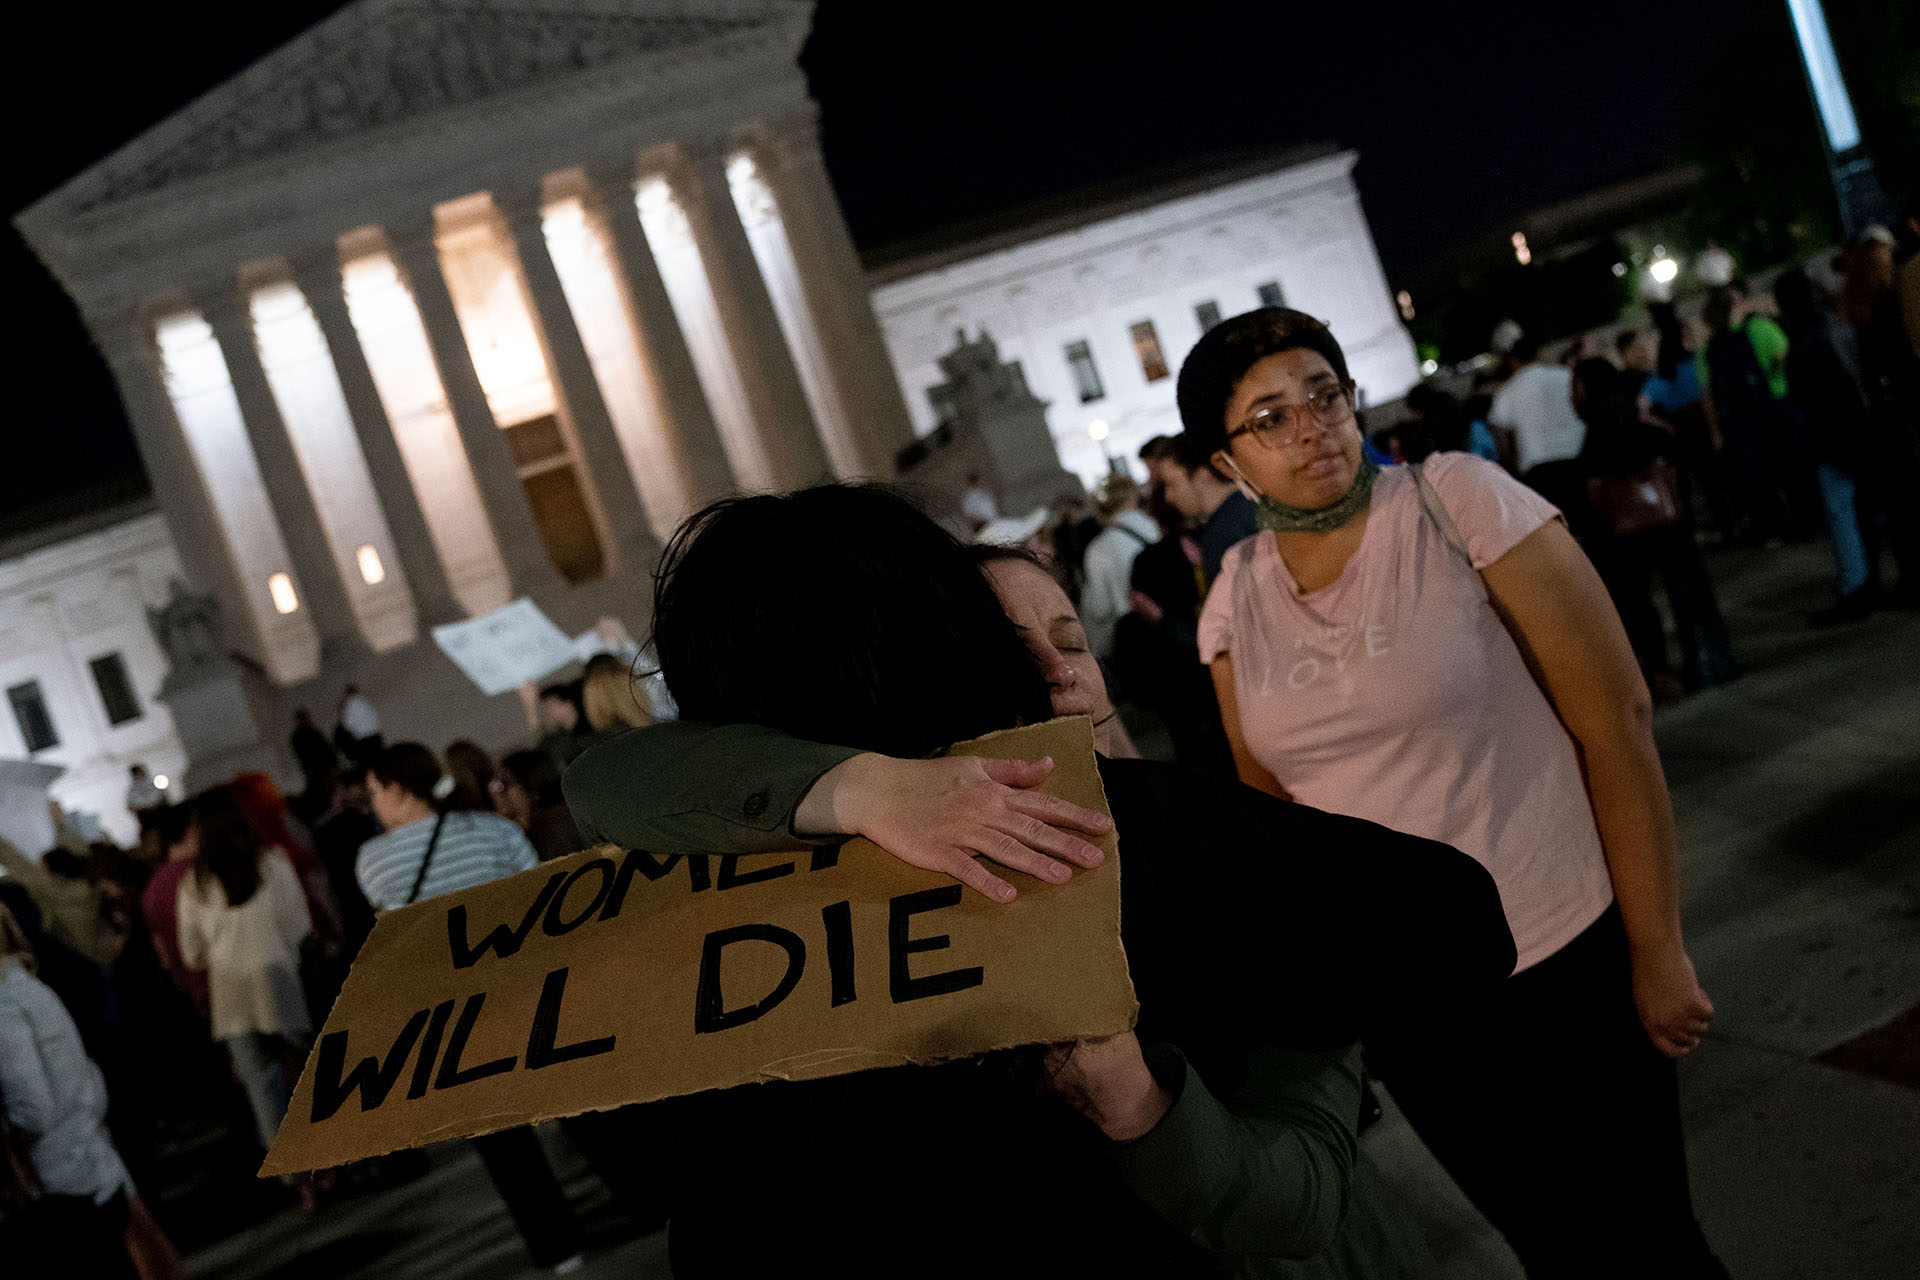 A photo of two people hugging holding a sign that says "women will die"